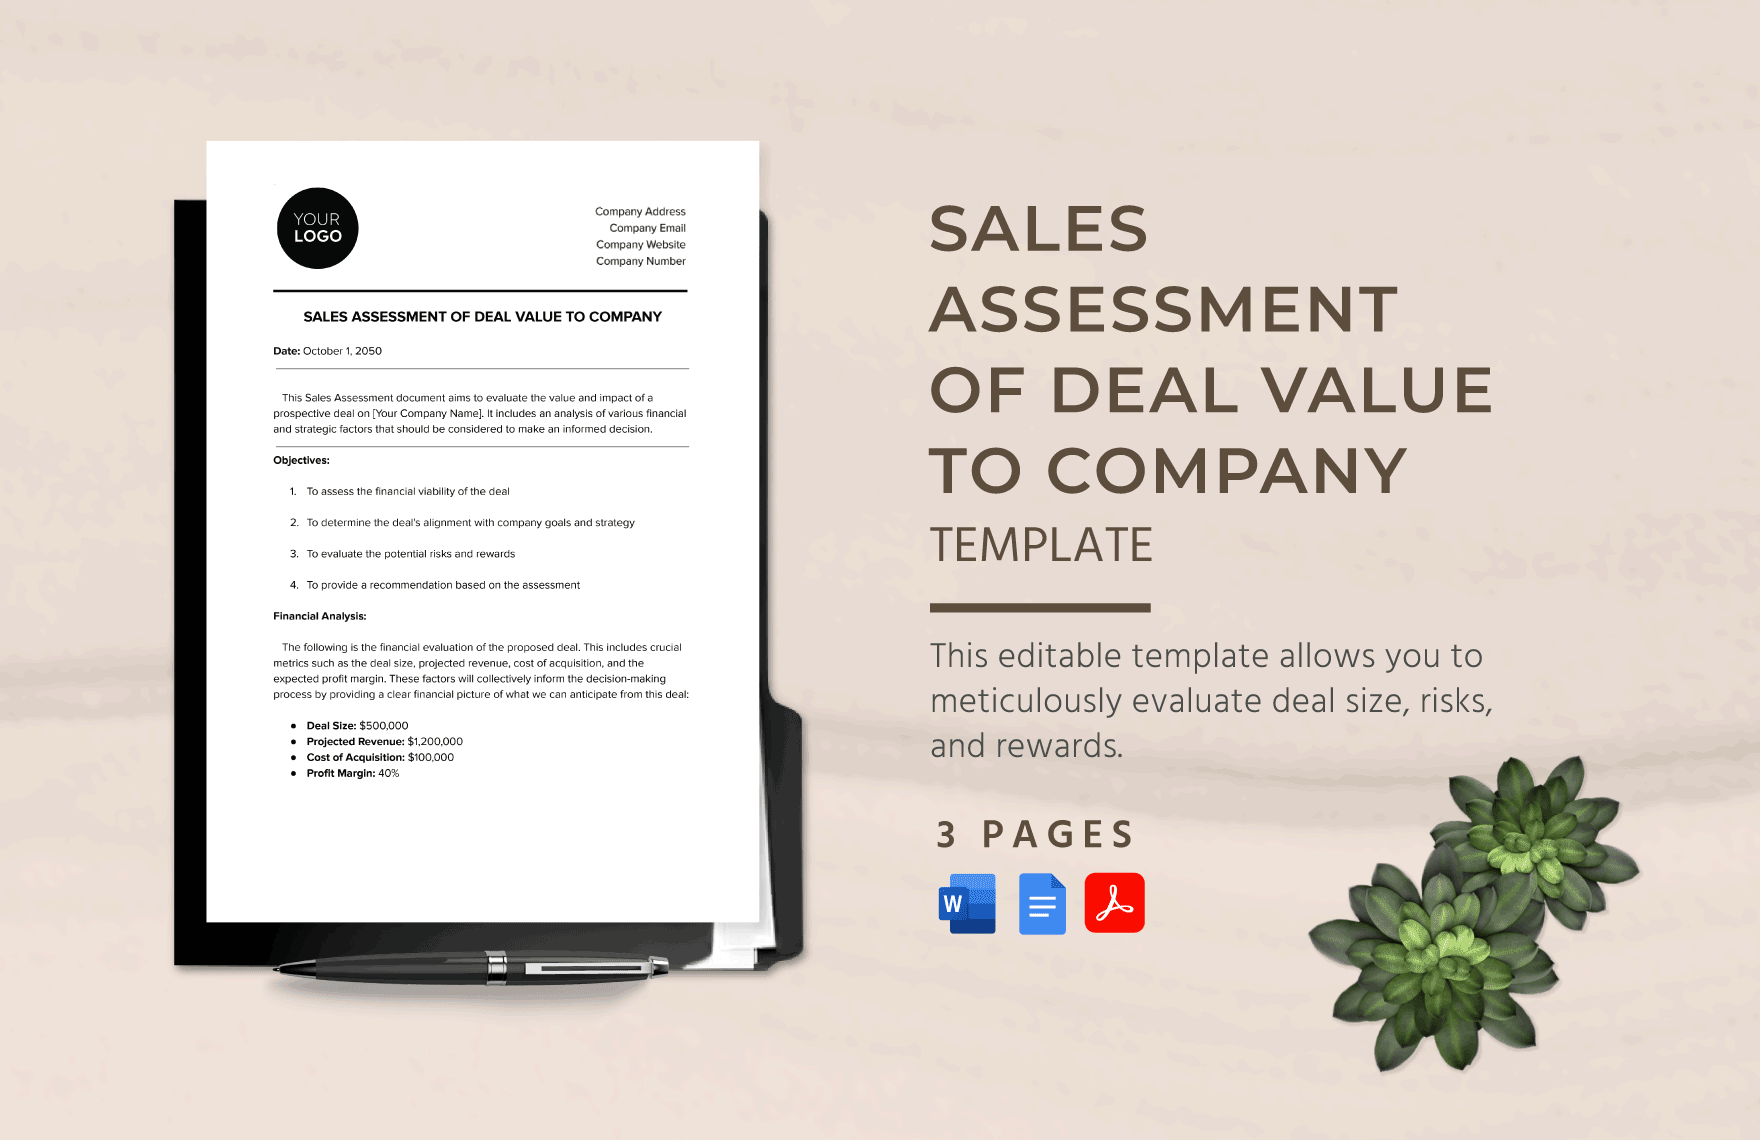 Sales Assessment of Deal Value to Company Template